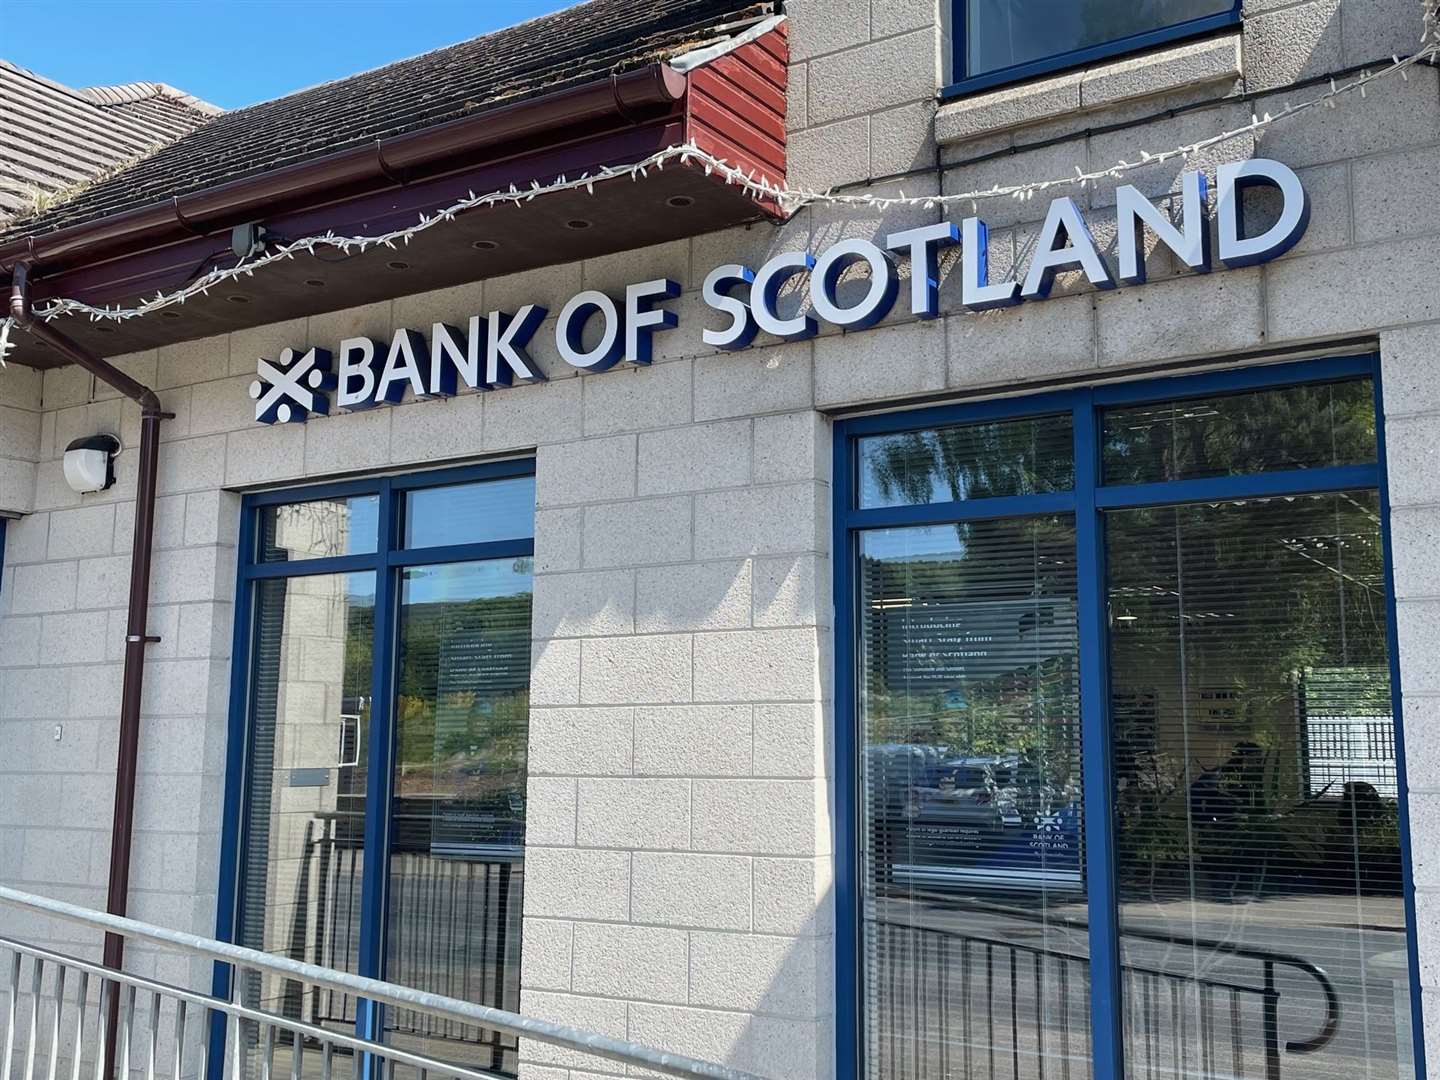 The Bank of Scotland has been a long time presence in the centre of Aviemore.